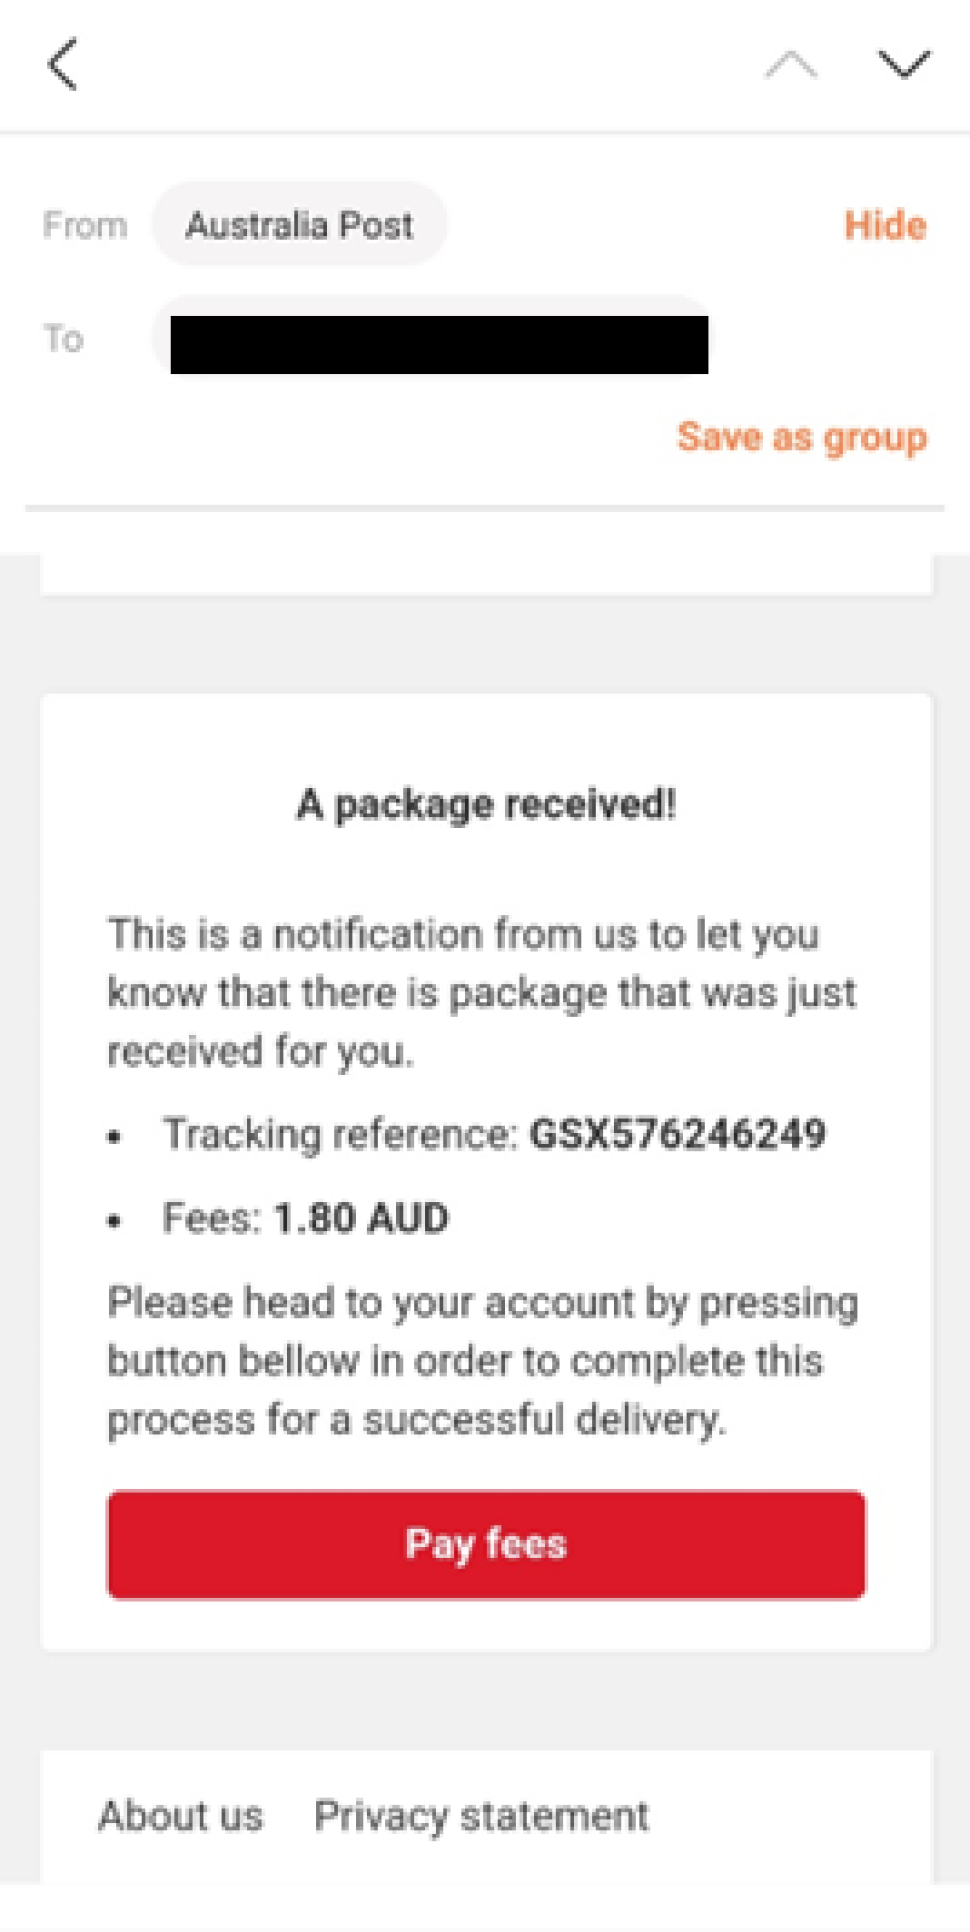 An email is shown as sender mentioned as Australia Post with receiver address greyed out.
Email reads as below.
“ A package received!
This is a notification from us to let you know that there is a package that was just received for you.
Tracking reference: GSX576246249
Fees: 1.80 AUD
Please head to your account by pressing button bellow in order to complete this process for a successful delivery”
There is a red button to click on which says “Pay fees’ on it.
